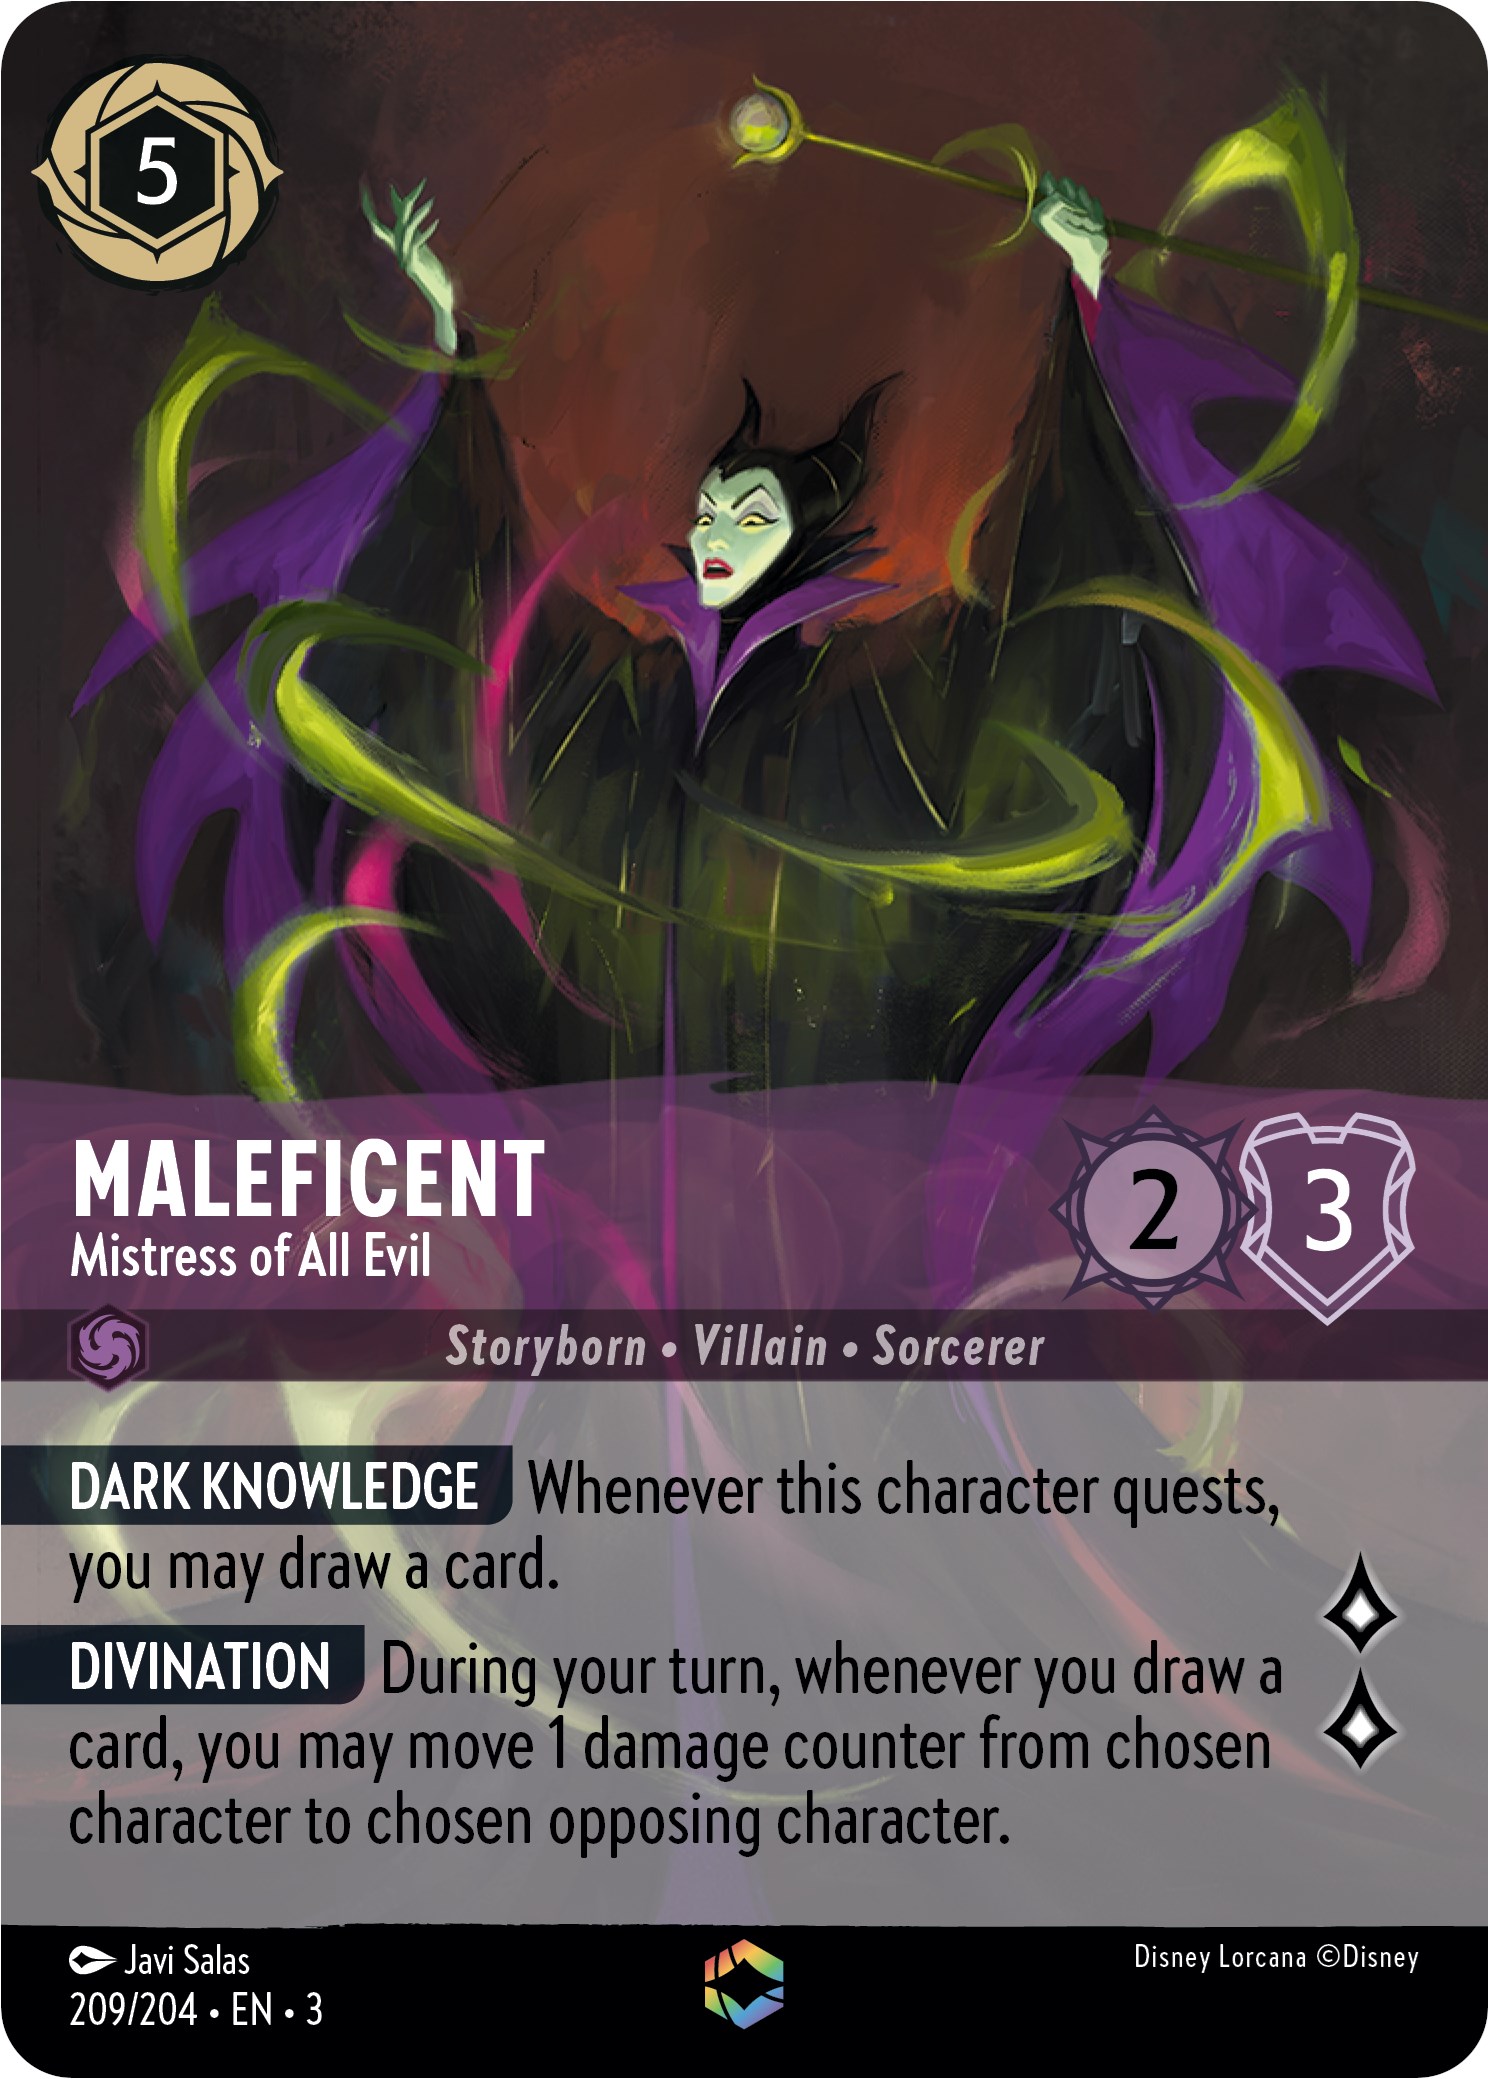 Maleficent - Mistress of All Evil (Enchanted)